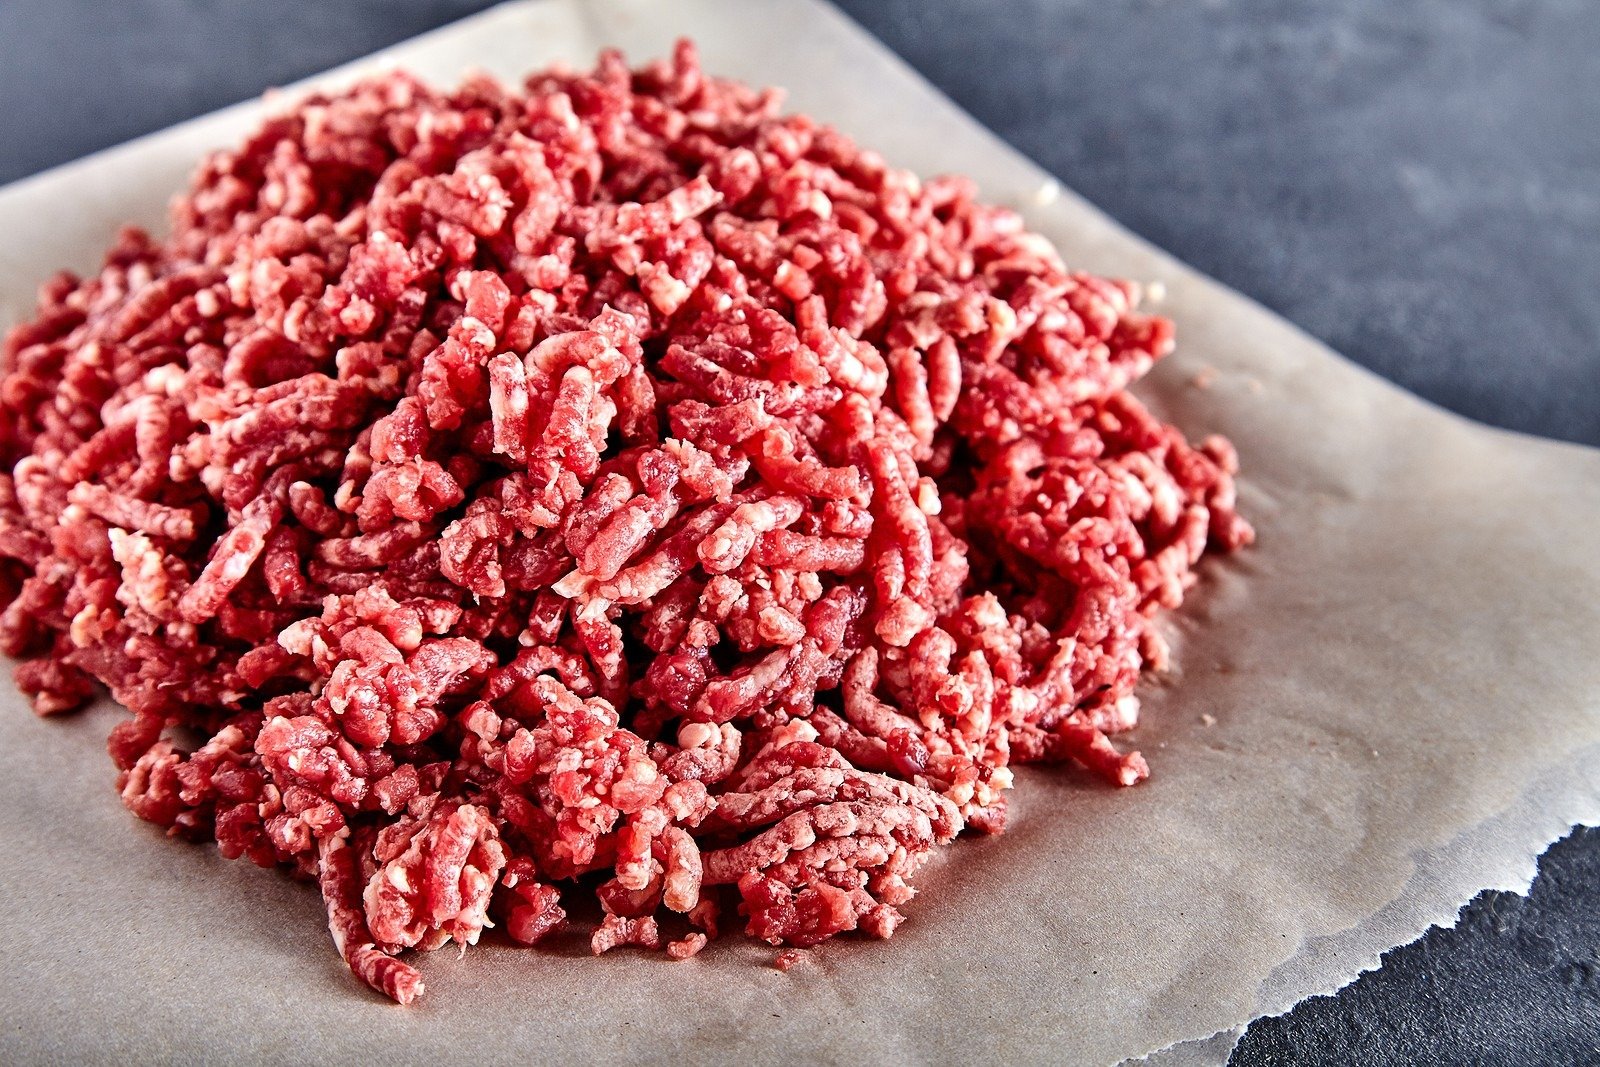 How to properly prepare minced meat without a meat grinder